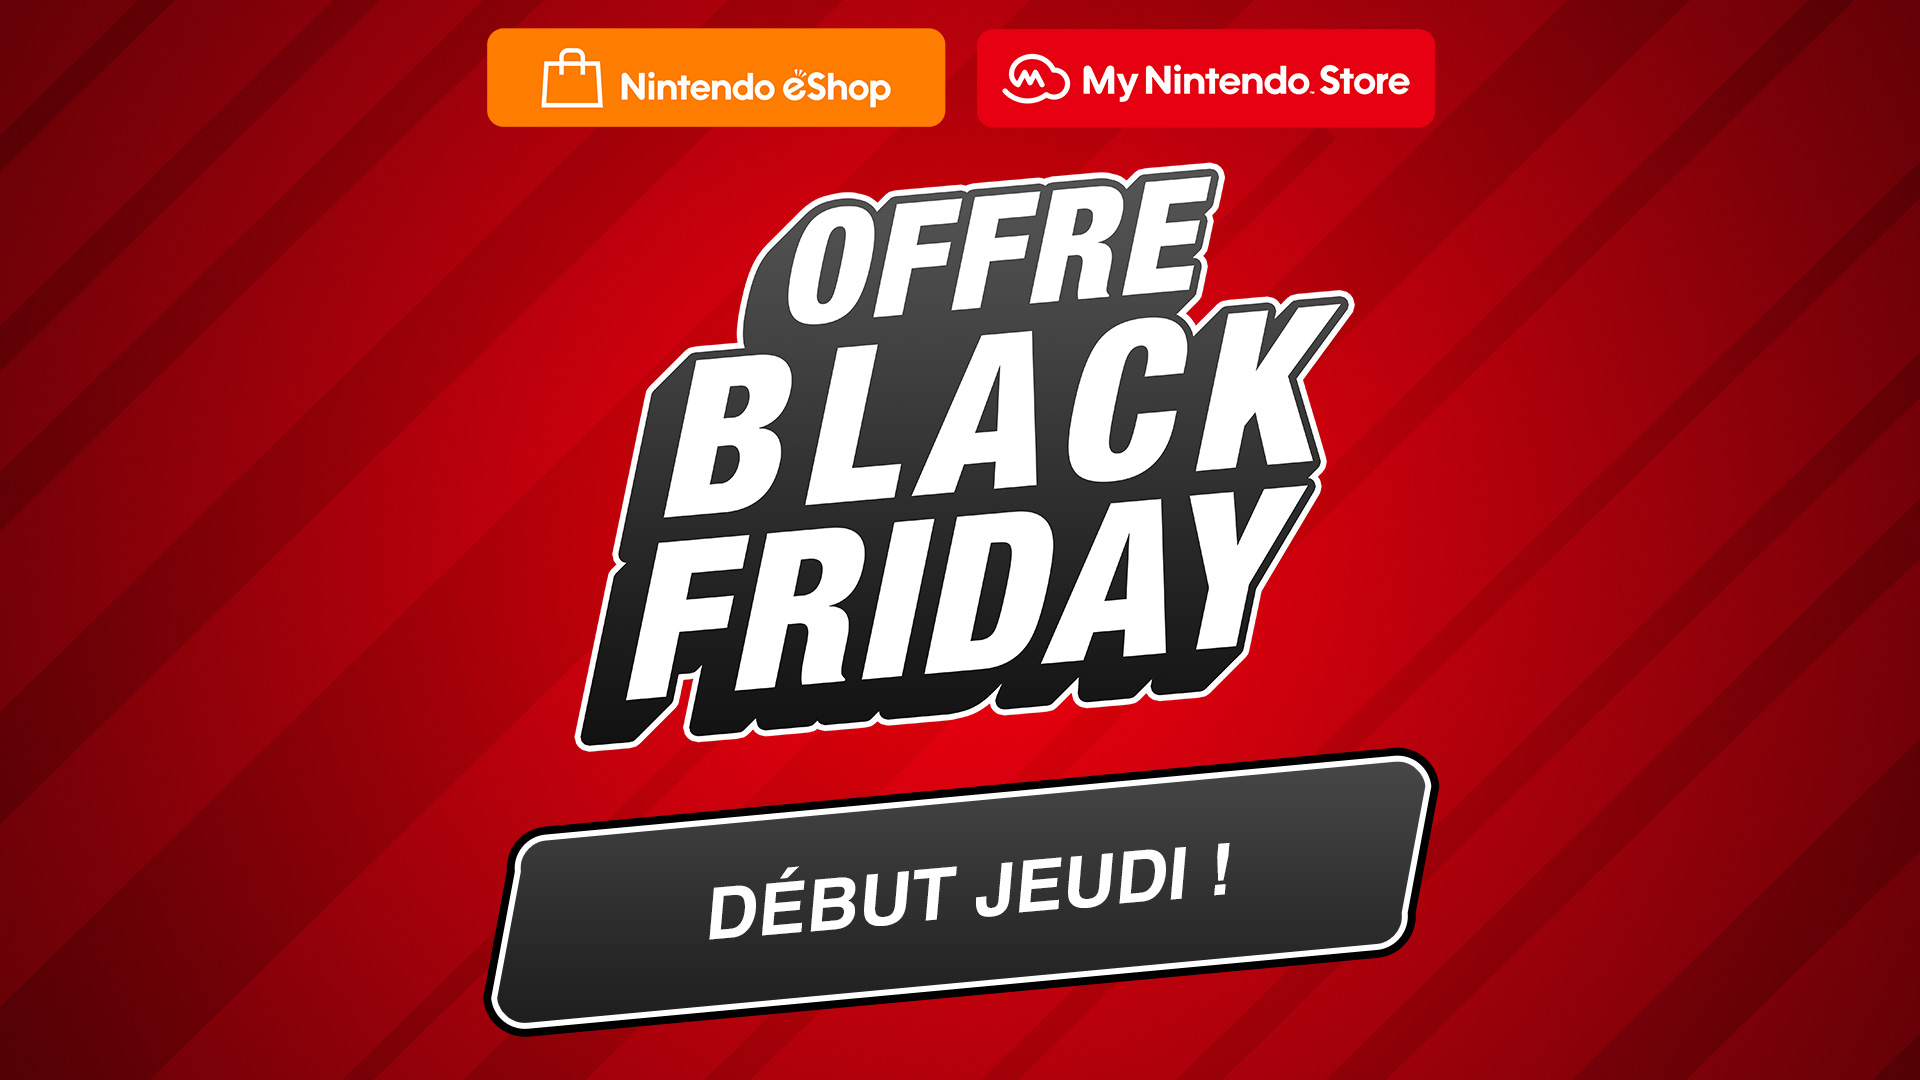 Nintendo Black Friday deals on Switch in the USA GAMINGDEPUTY